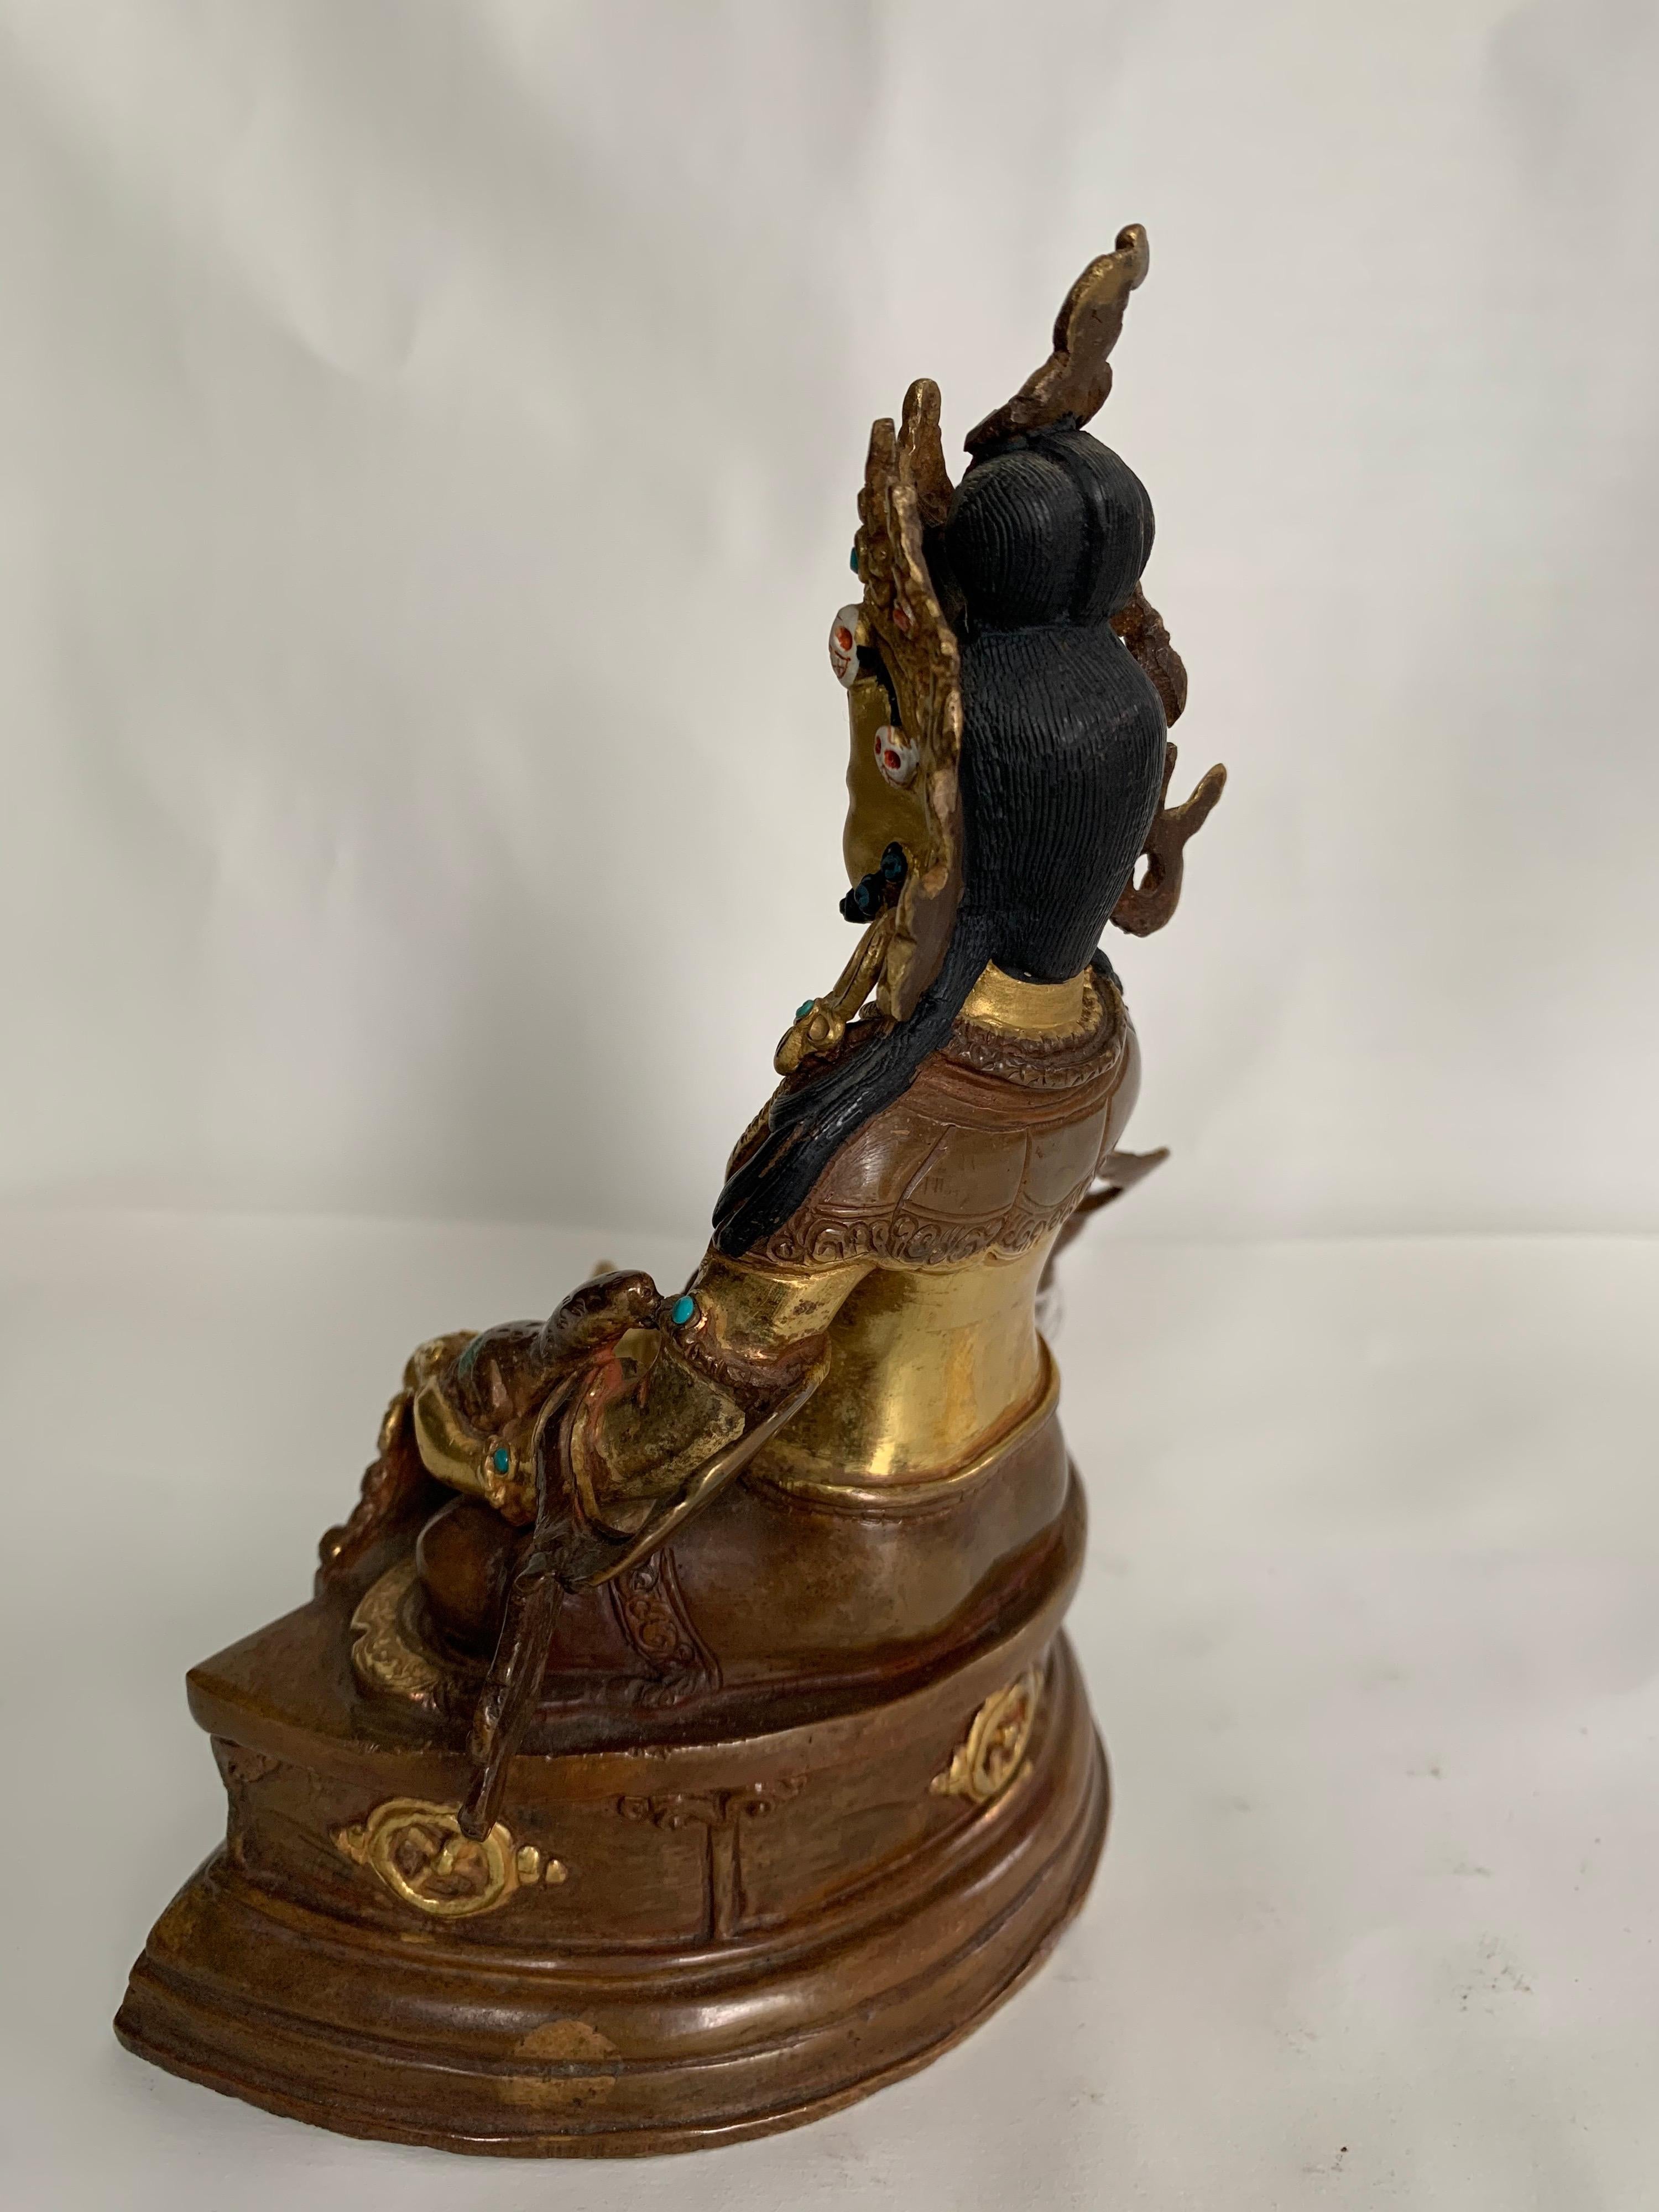 where to place kubera statue in house